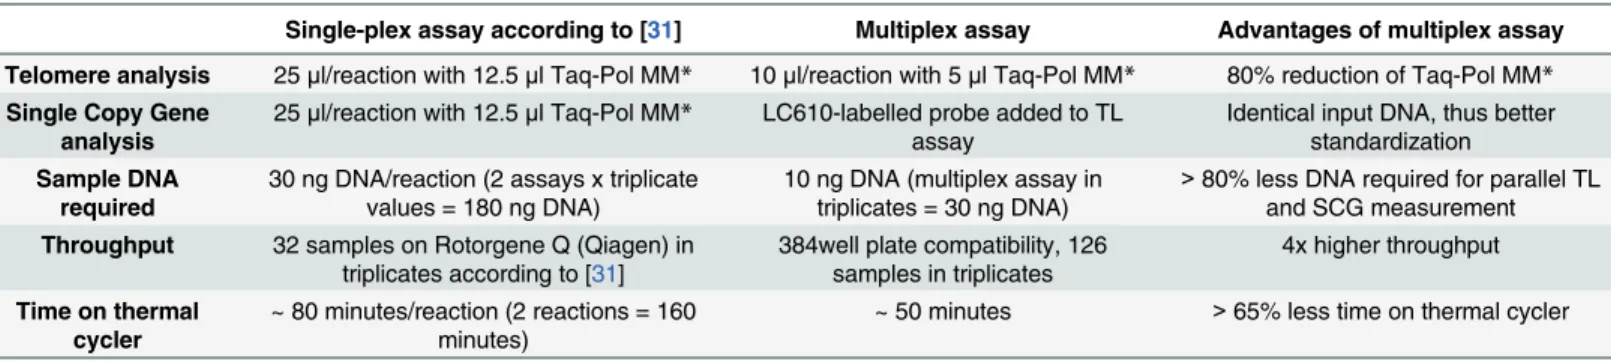 Table 2. Comparison of a published single-plex assays for quantification of TL and SCG and multiplex assay (adapted from [22, 31]).